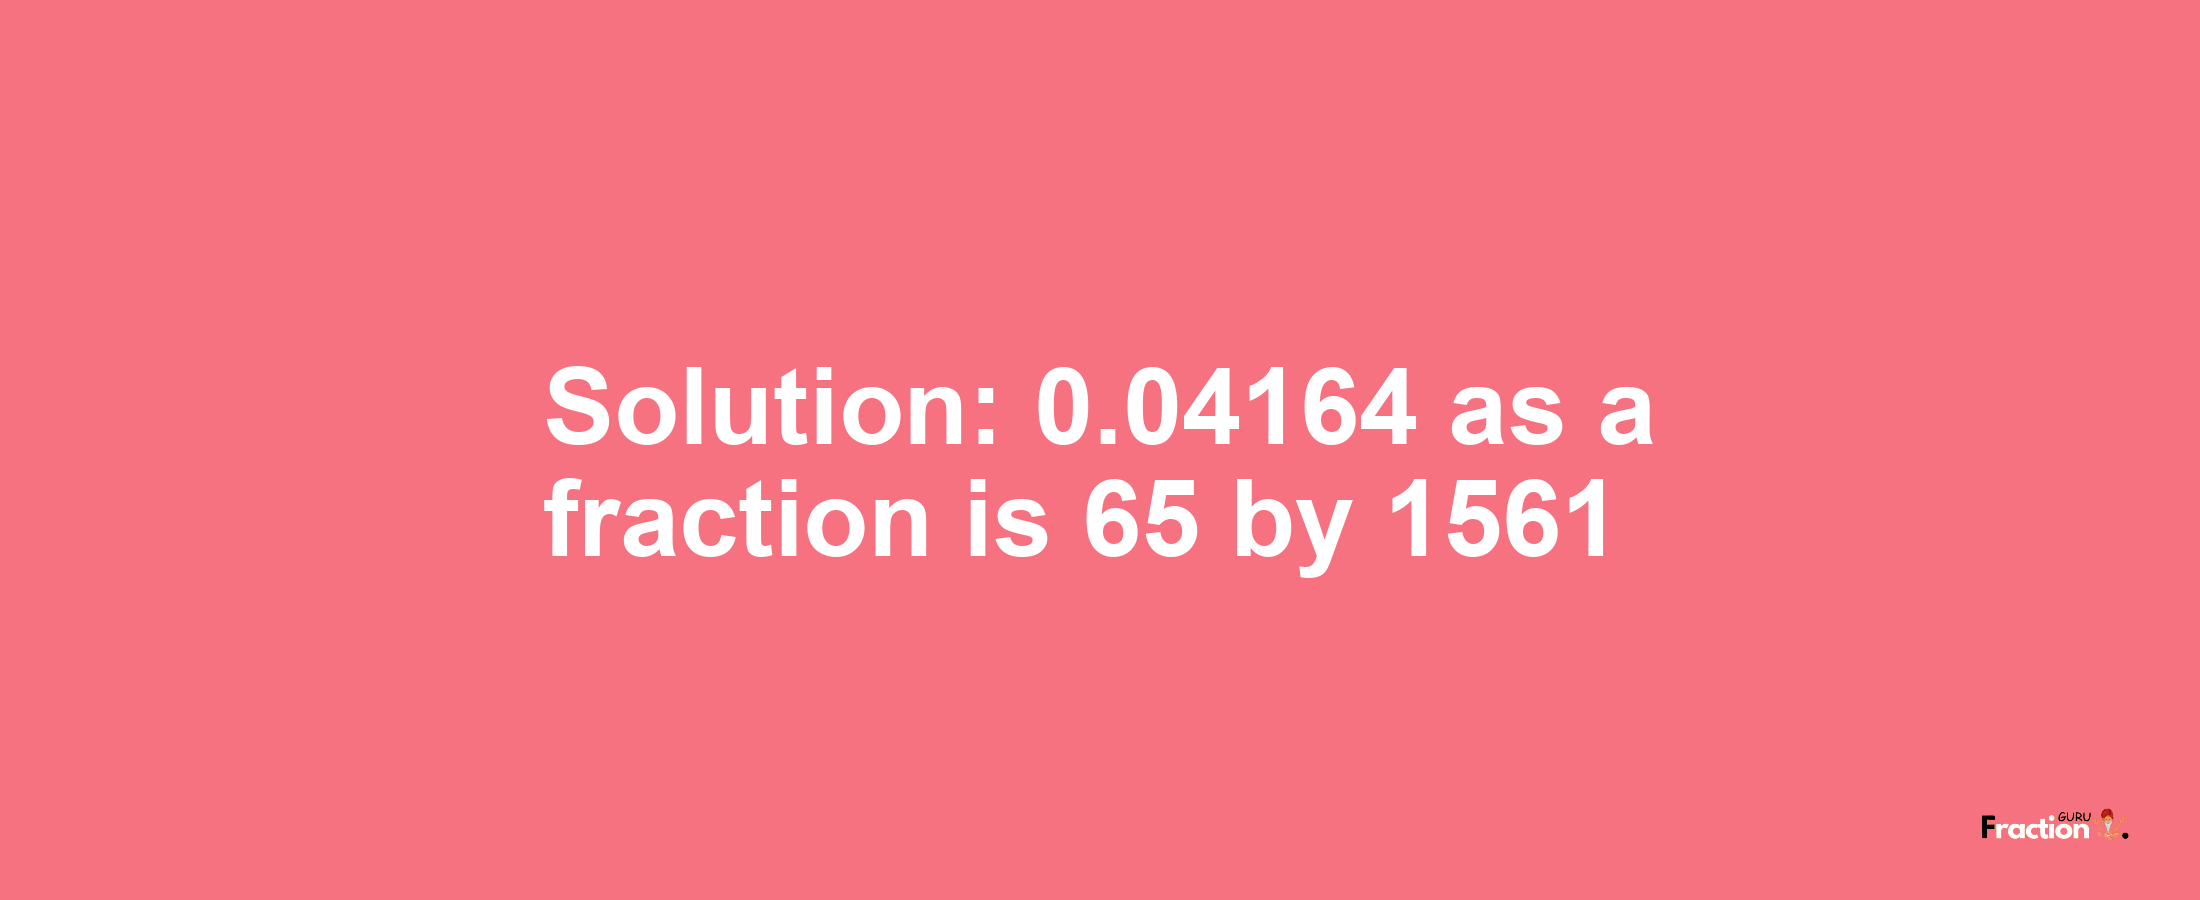 Solution:0.04164 as a fraction is 65/1561